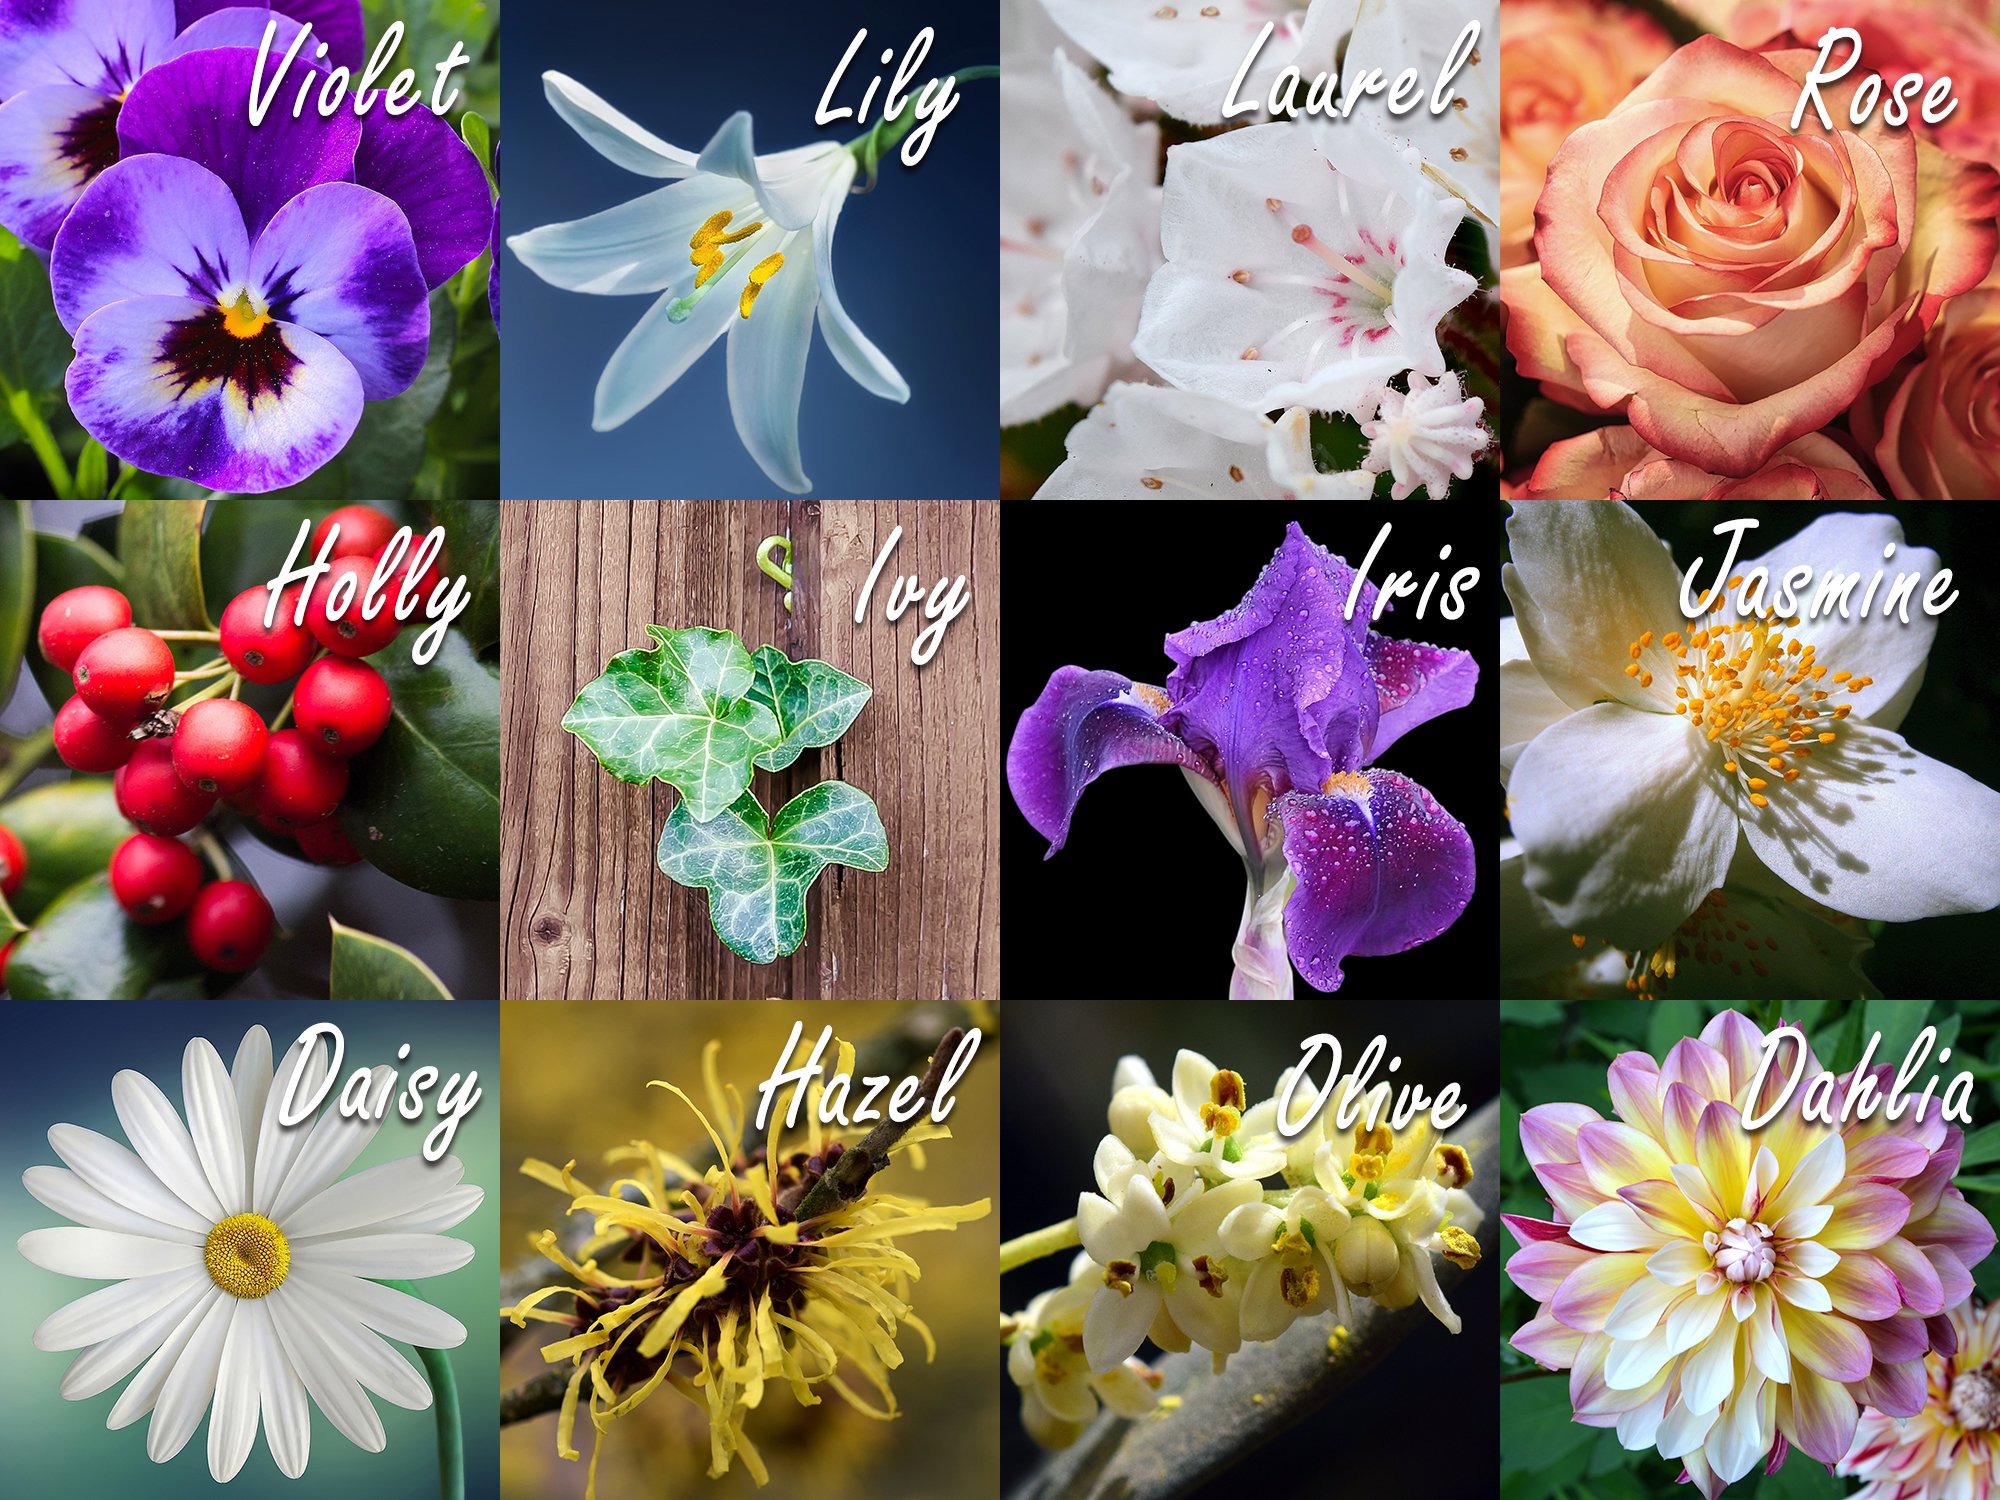 List Of Flowers With Pictures And Meanings / List of Flower Names With ...